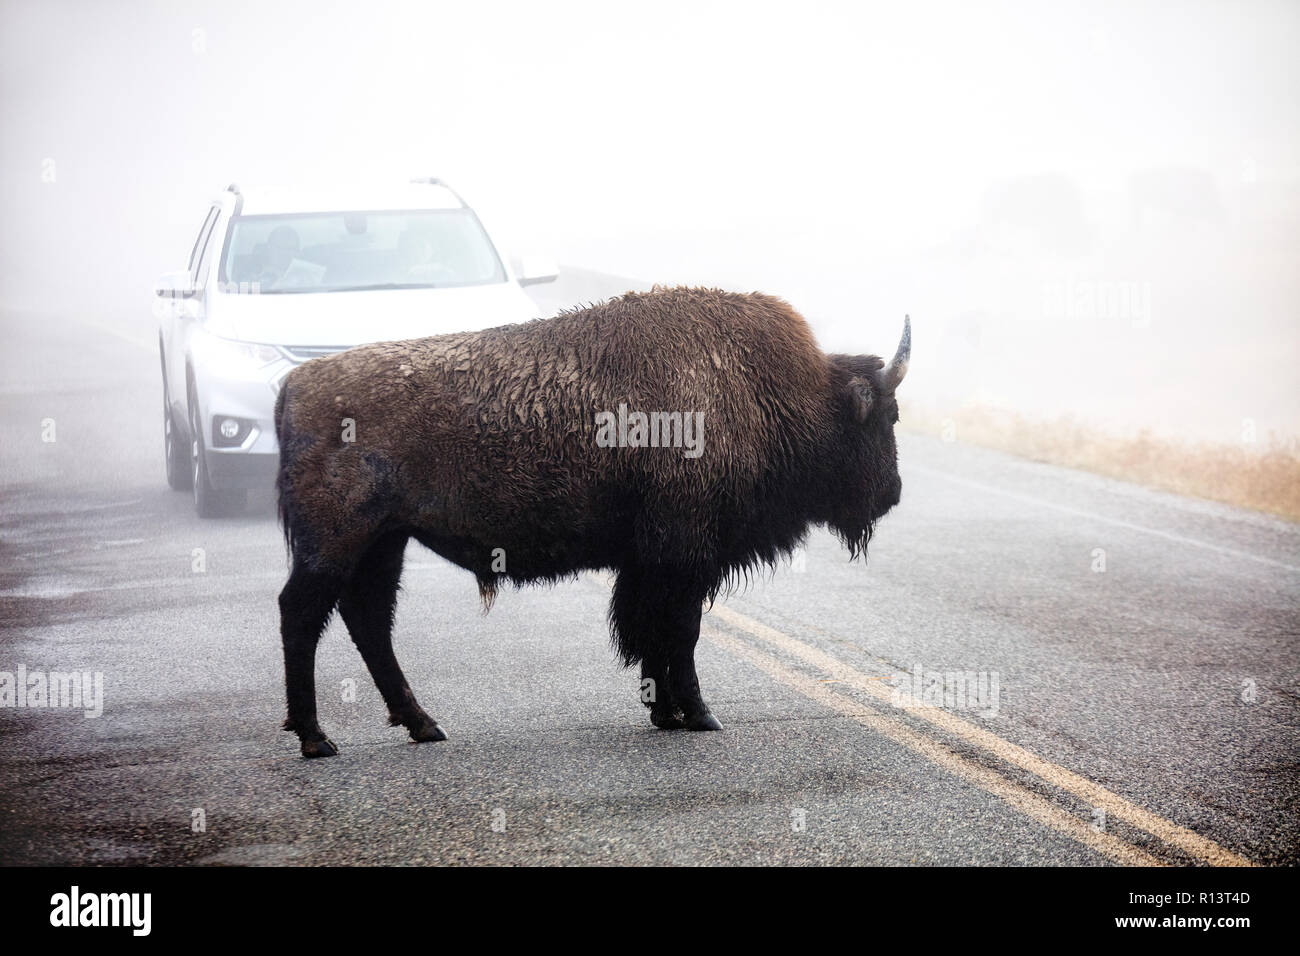 WY03531-00...WYOMING - Bison in the fog near Madison Junction of Yellowstone National Park. Stock Photo